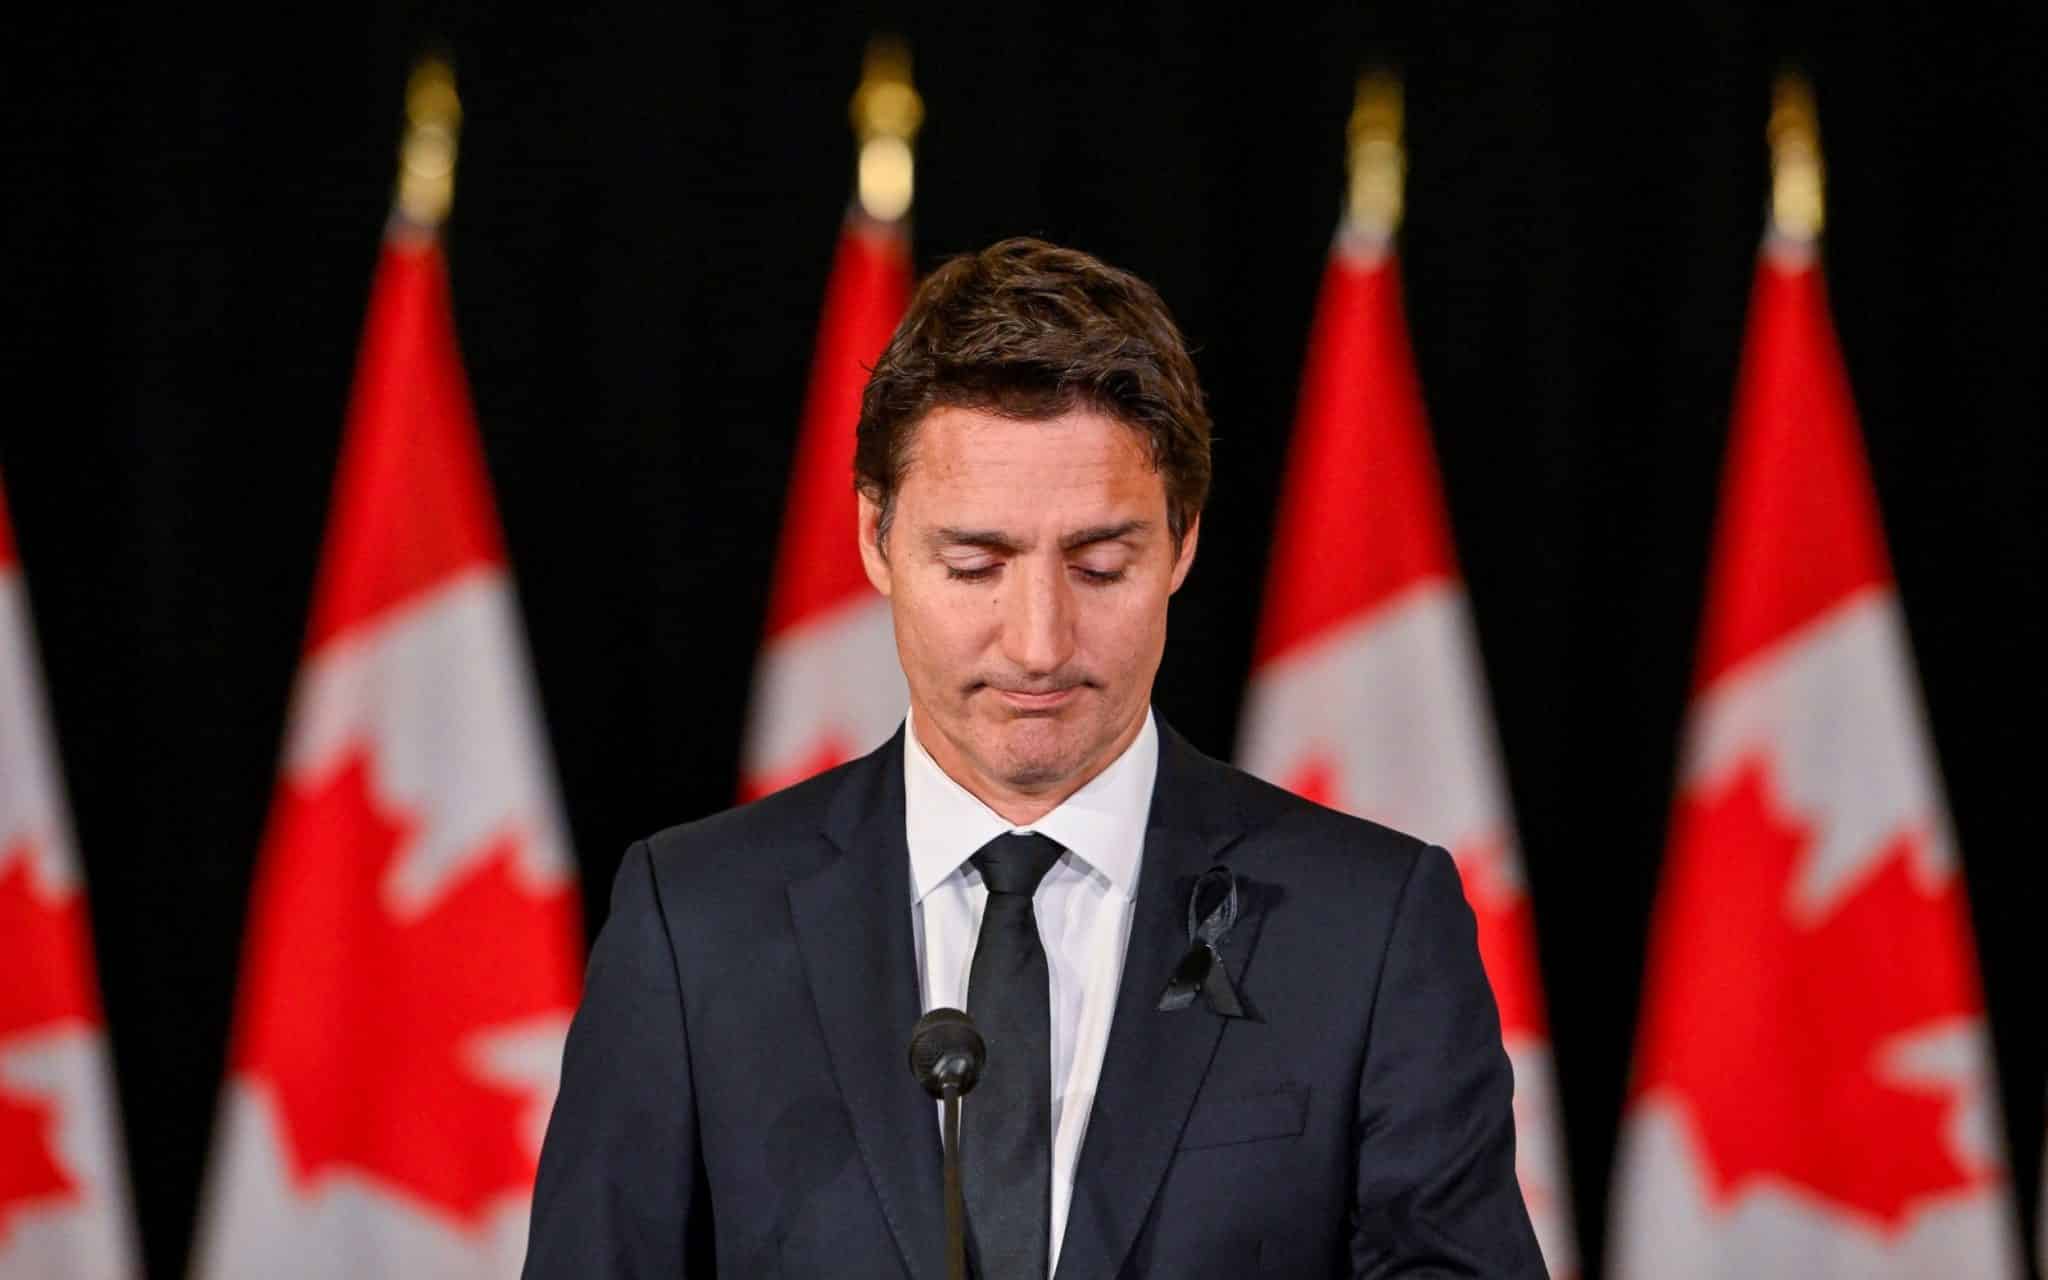 Trudeau Uses Victim Card Says Things Not 'Easy' for Him Either